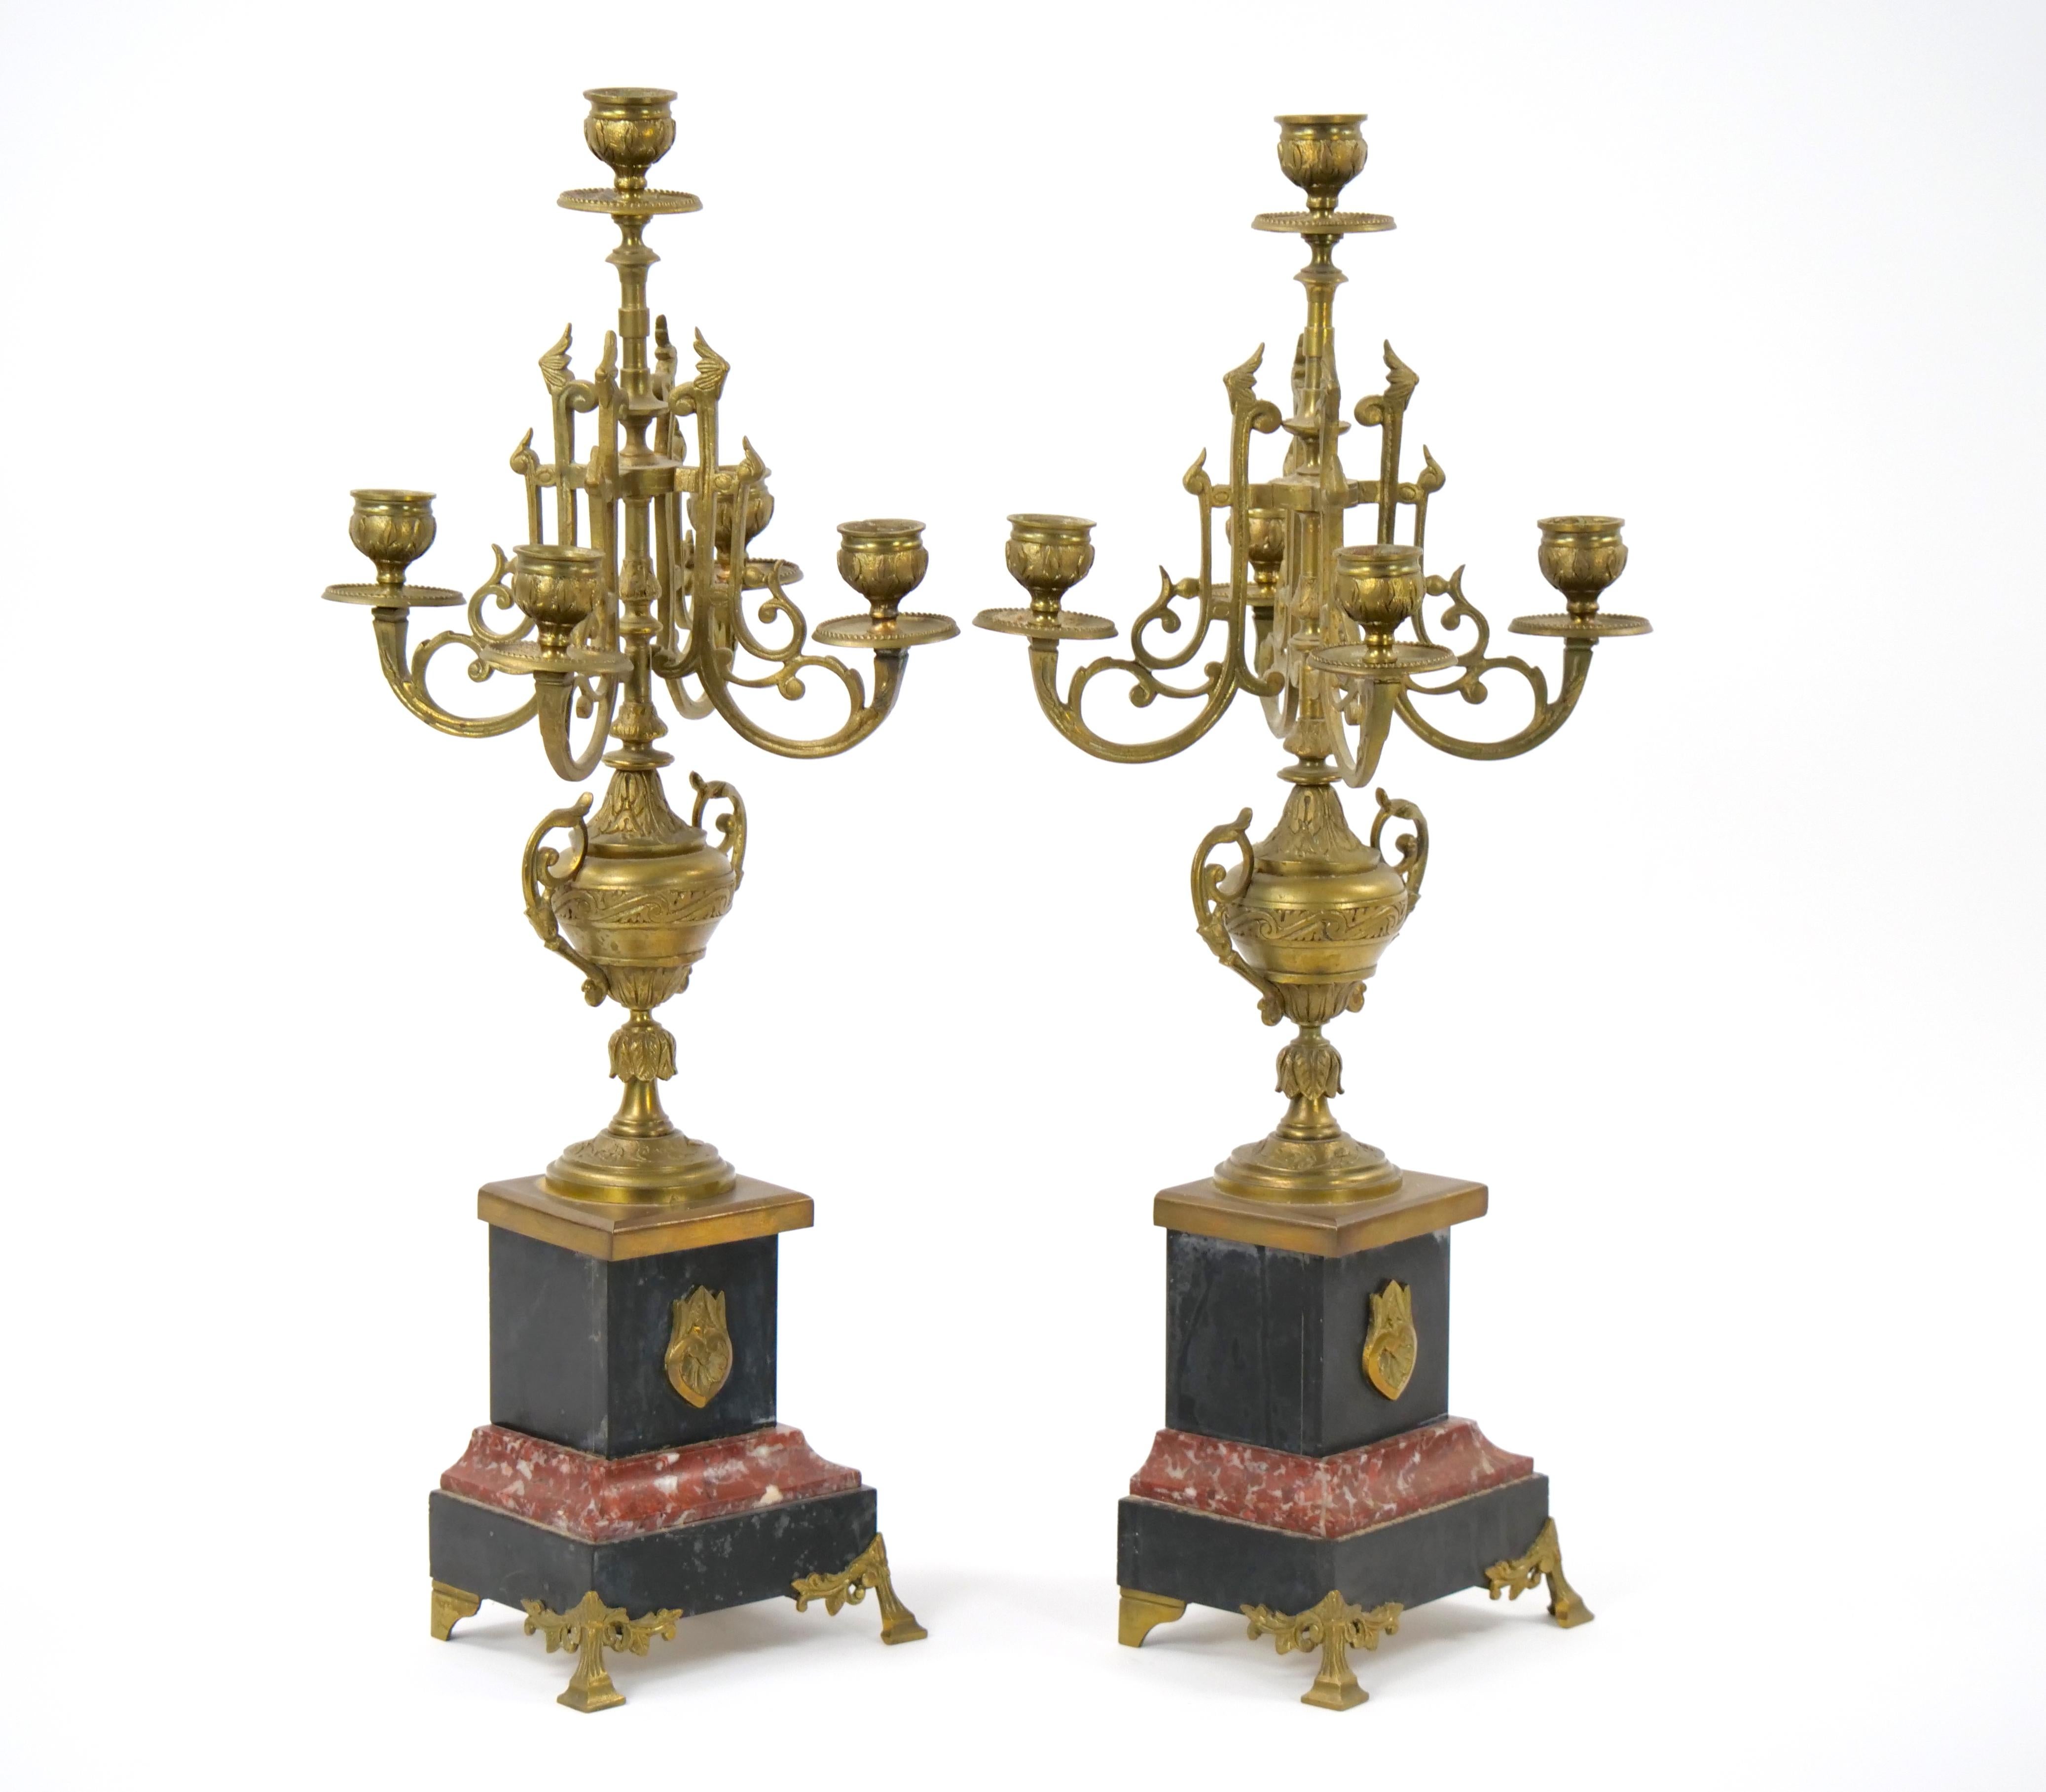 Step into the timeless elegance of the 19th century with this magnificent Gilt Bronze-Mounted Slate and Rouge Marble Five Arm Candelabra. Meticulously crafted, this candelabra is a fusion of artistry, opulence, and functional beauty. The harmonious